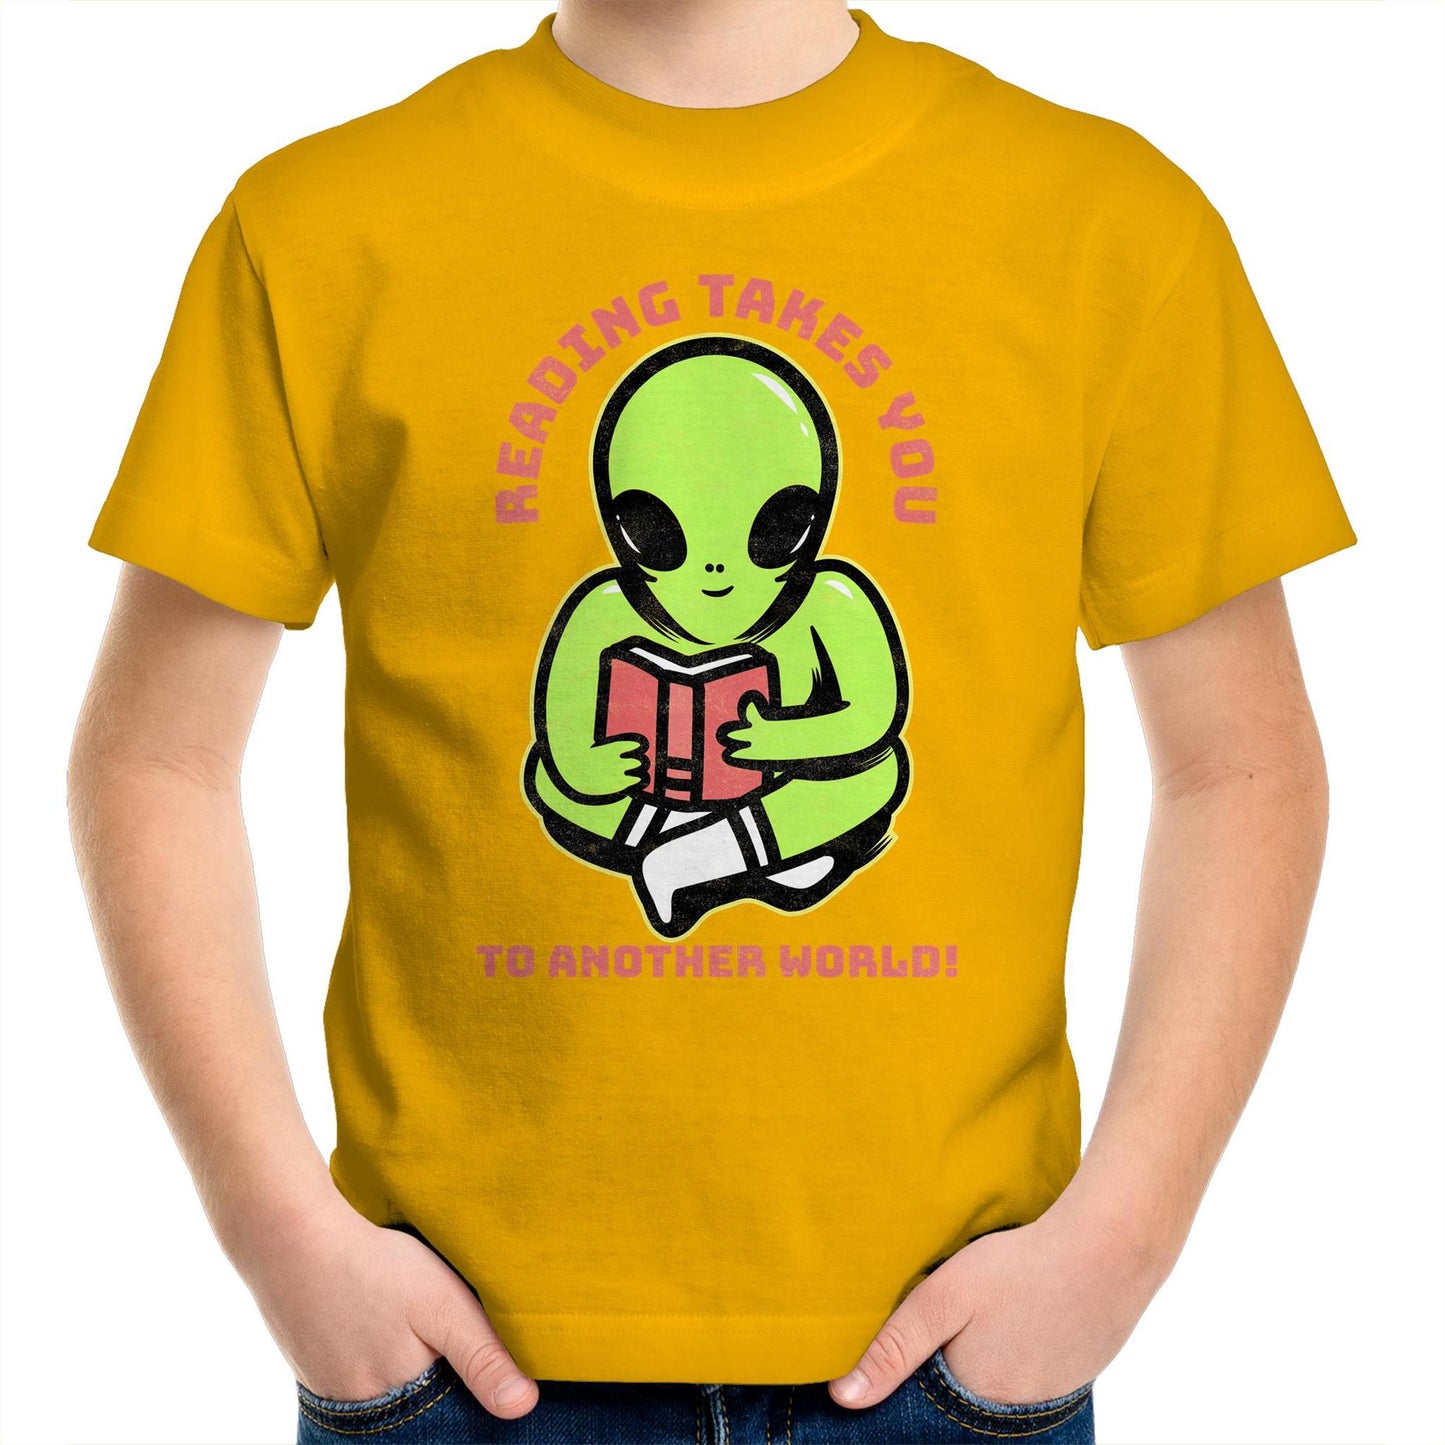 Reading Takes You To Another World, Alien - Kids Youth T-Shirt Gold Kids Youth T-shirt Reading Sci Fi